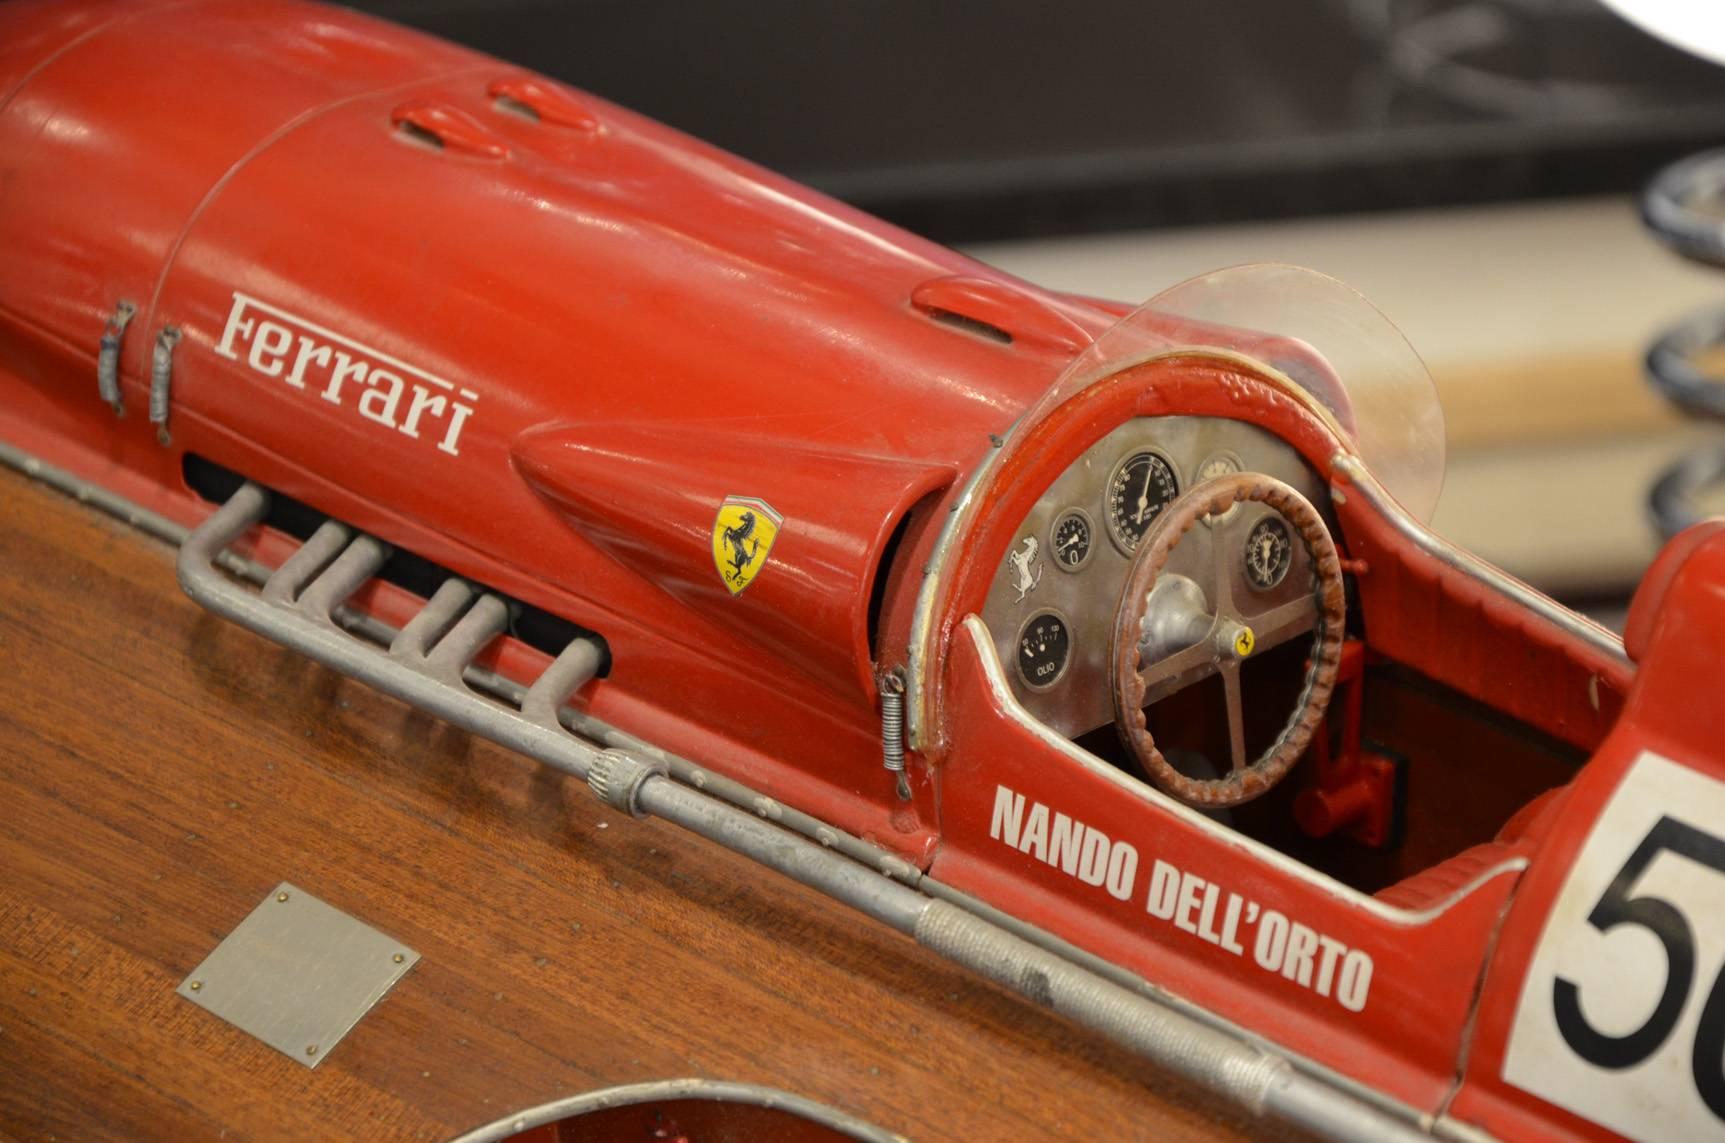 Excellent condition
Nando Dell'Orto model speedboat, the highly detailed model of one of several Ferrari 375 V12 engined speedboats that raced in Italian waters during the 1950s, probably 1:12th scale, featuring a four-spoke Ferrari steering wheel,